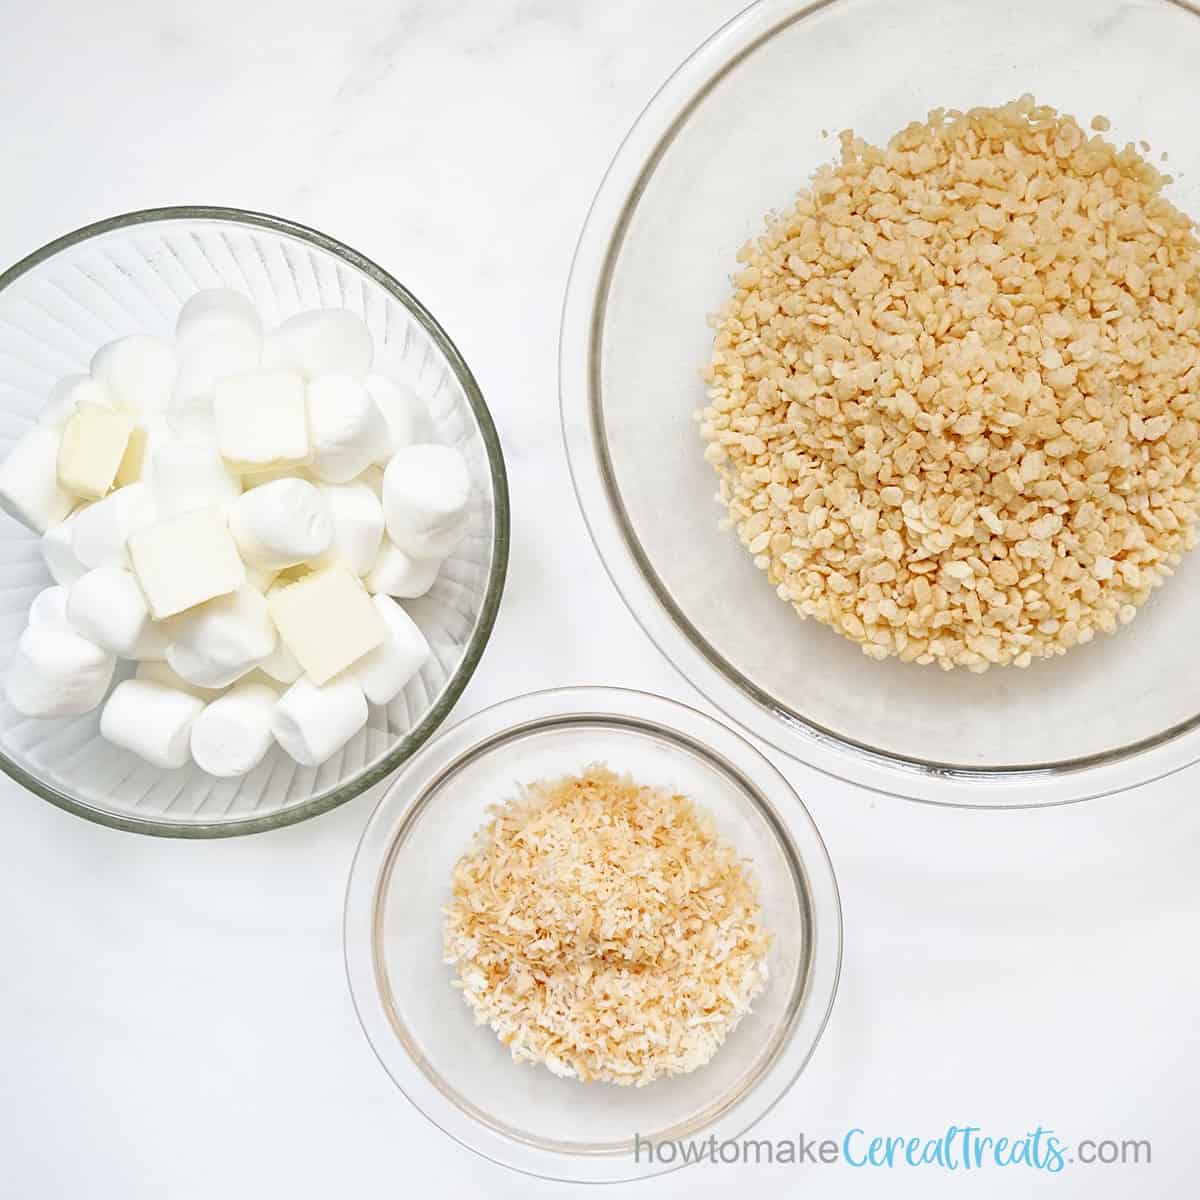 marshmallows and butter, Rice Krispies, and toasted coconut